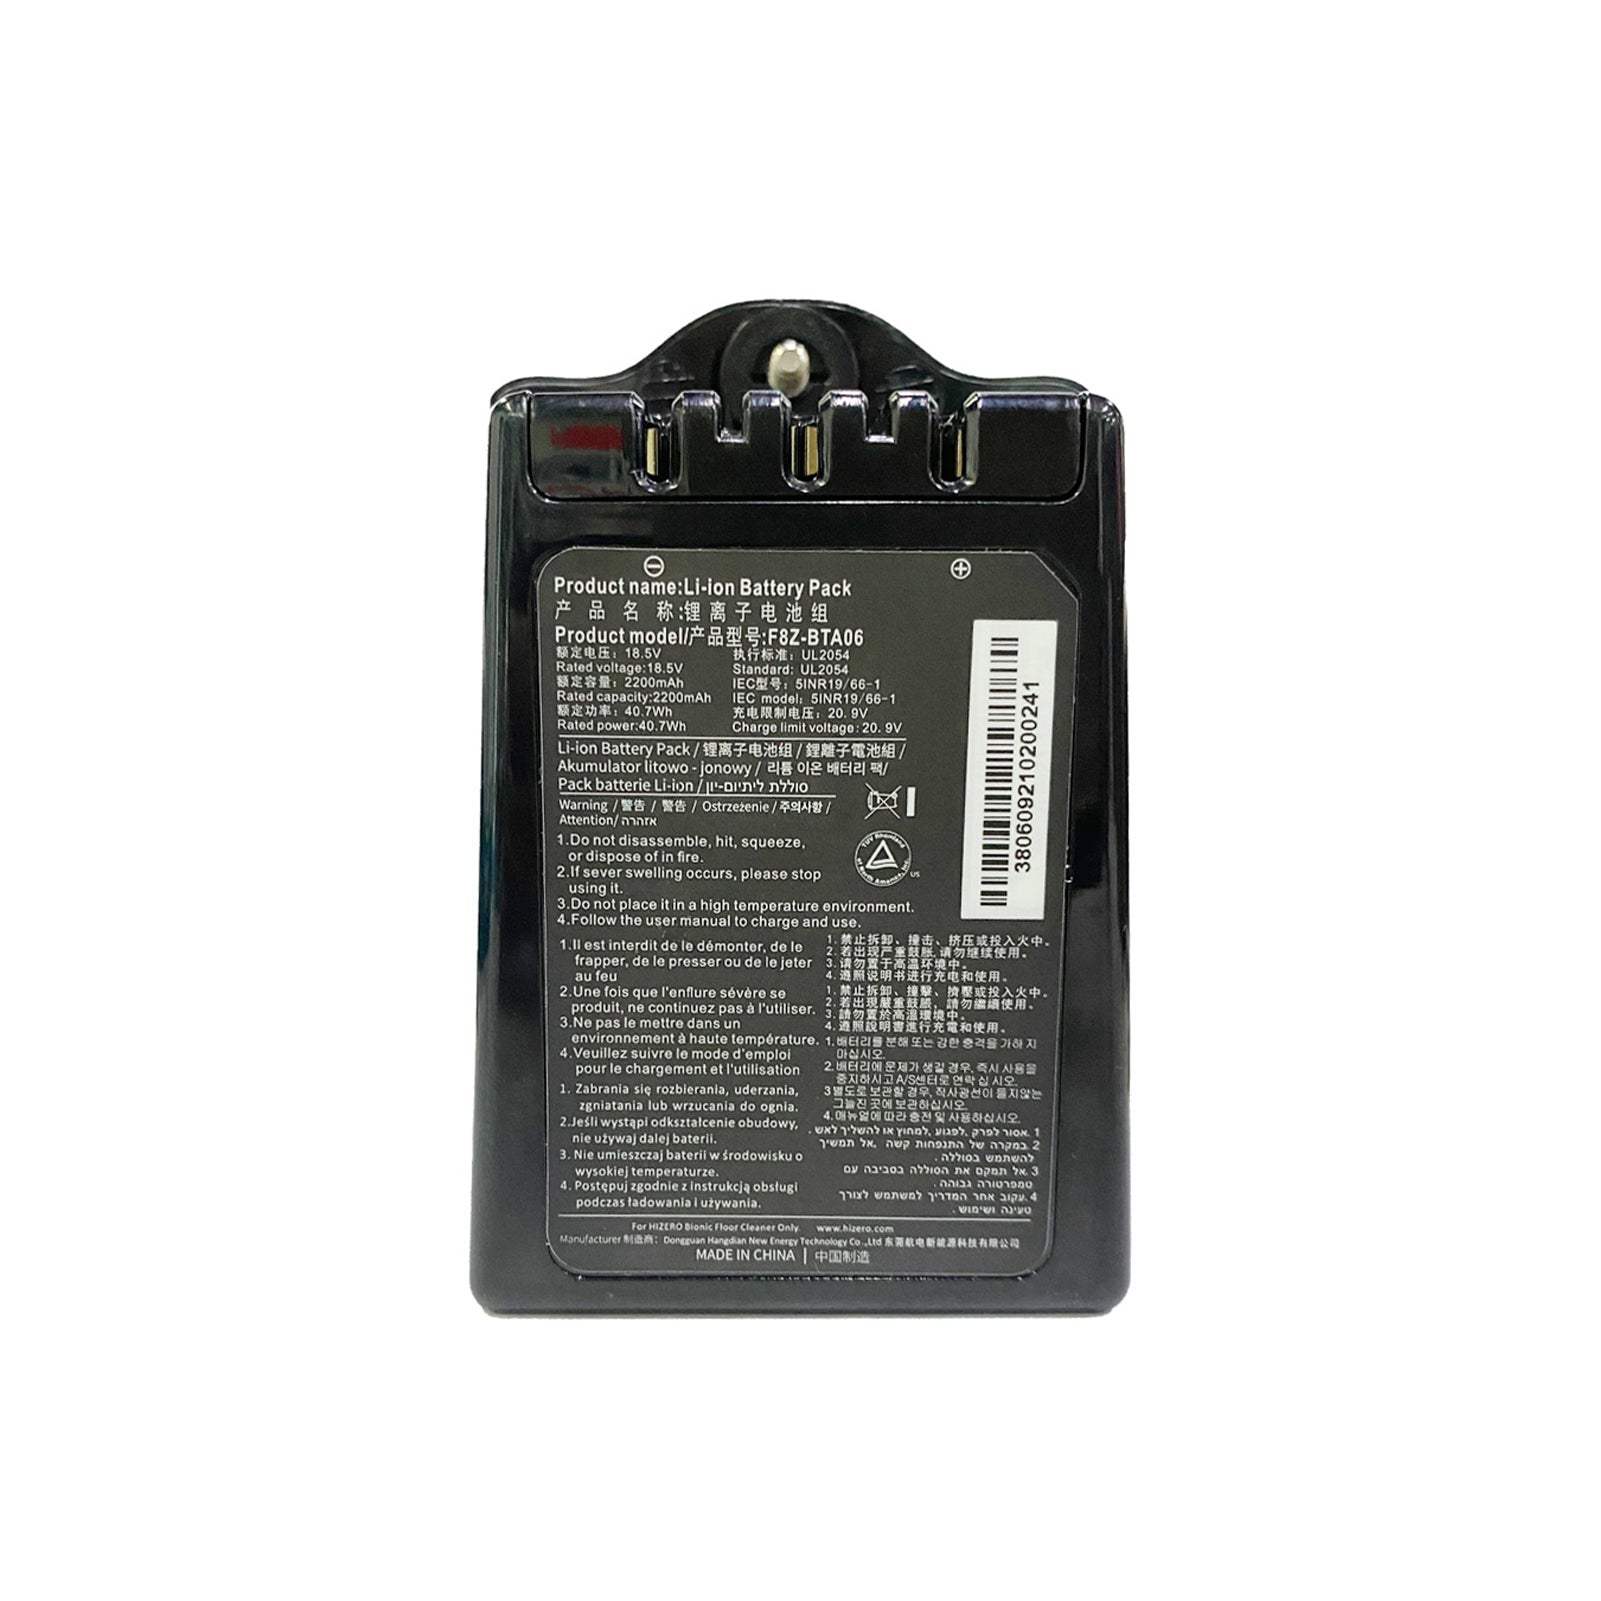 Hizero Lithium Ion Battery for F803 & F801